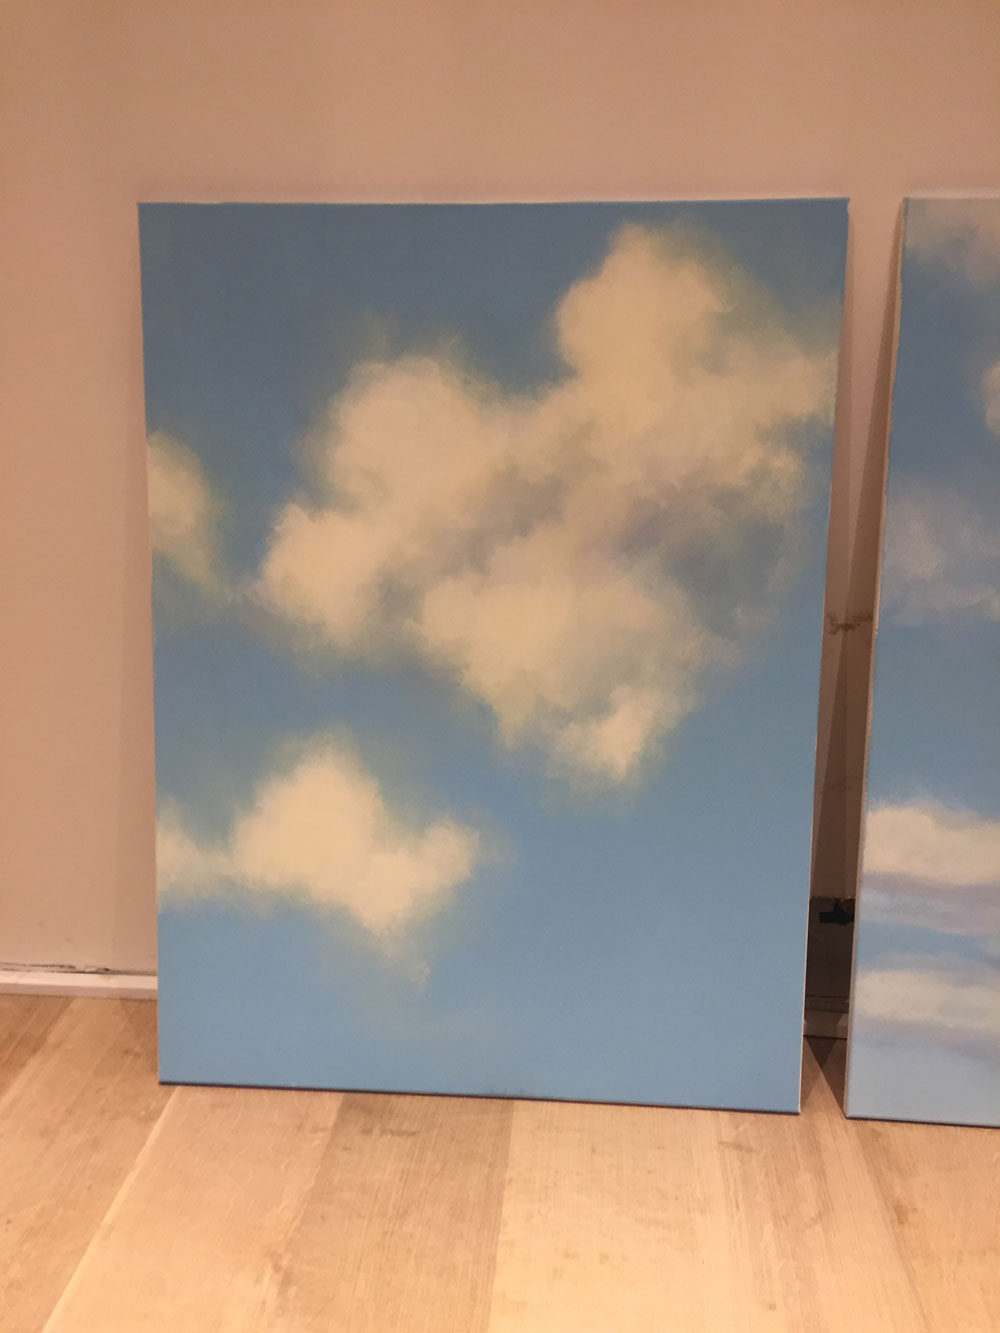 Samples on canvas